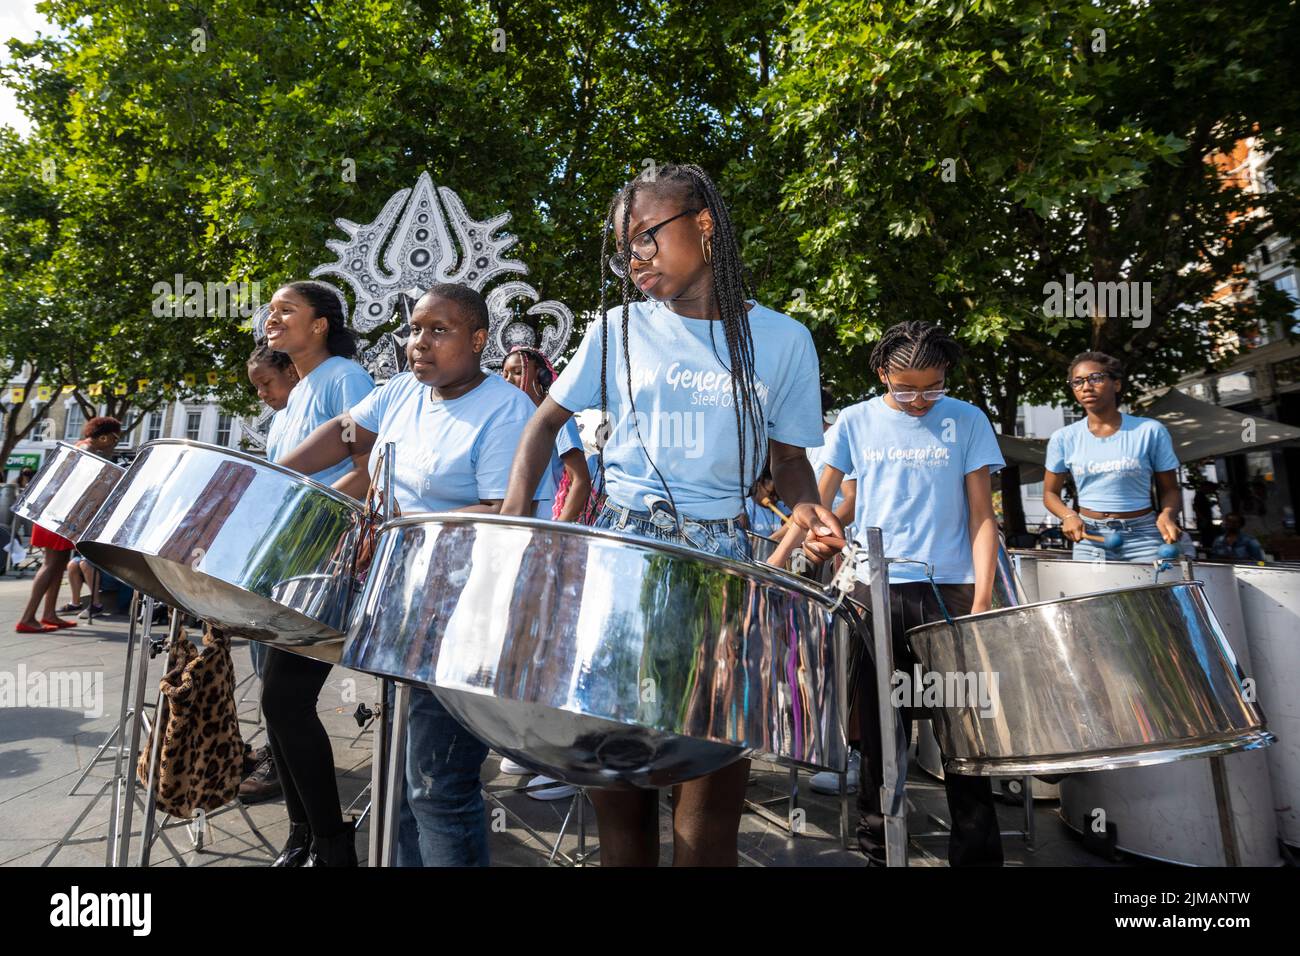 London, UK.  5 August 2022. The New Generation Steel Orchestra performs at Carnival in Chelsea, an event showcasing carnival costumes, music and culture.  The show is outside The Chelsea Theatre and is part of this year’s Kensington & Chelsea Festival. Credit: Stephen Chung / Alamy Live News Stock Photo